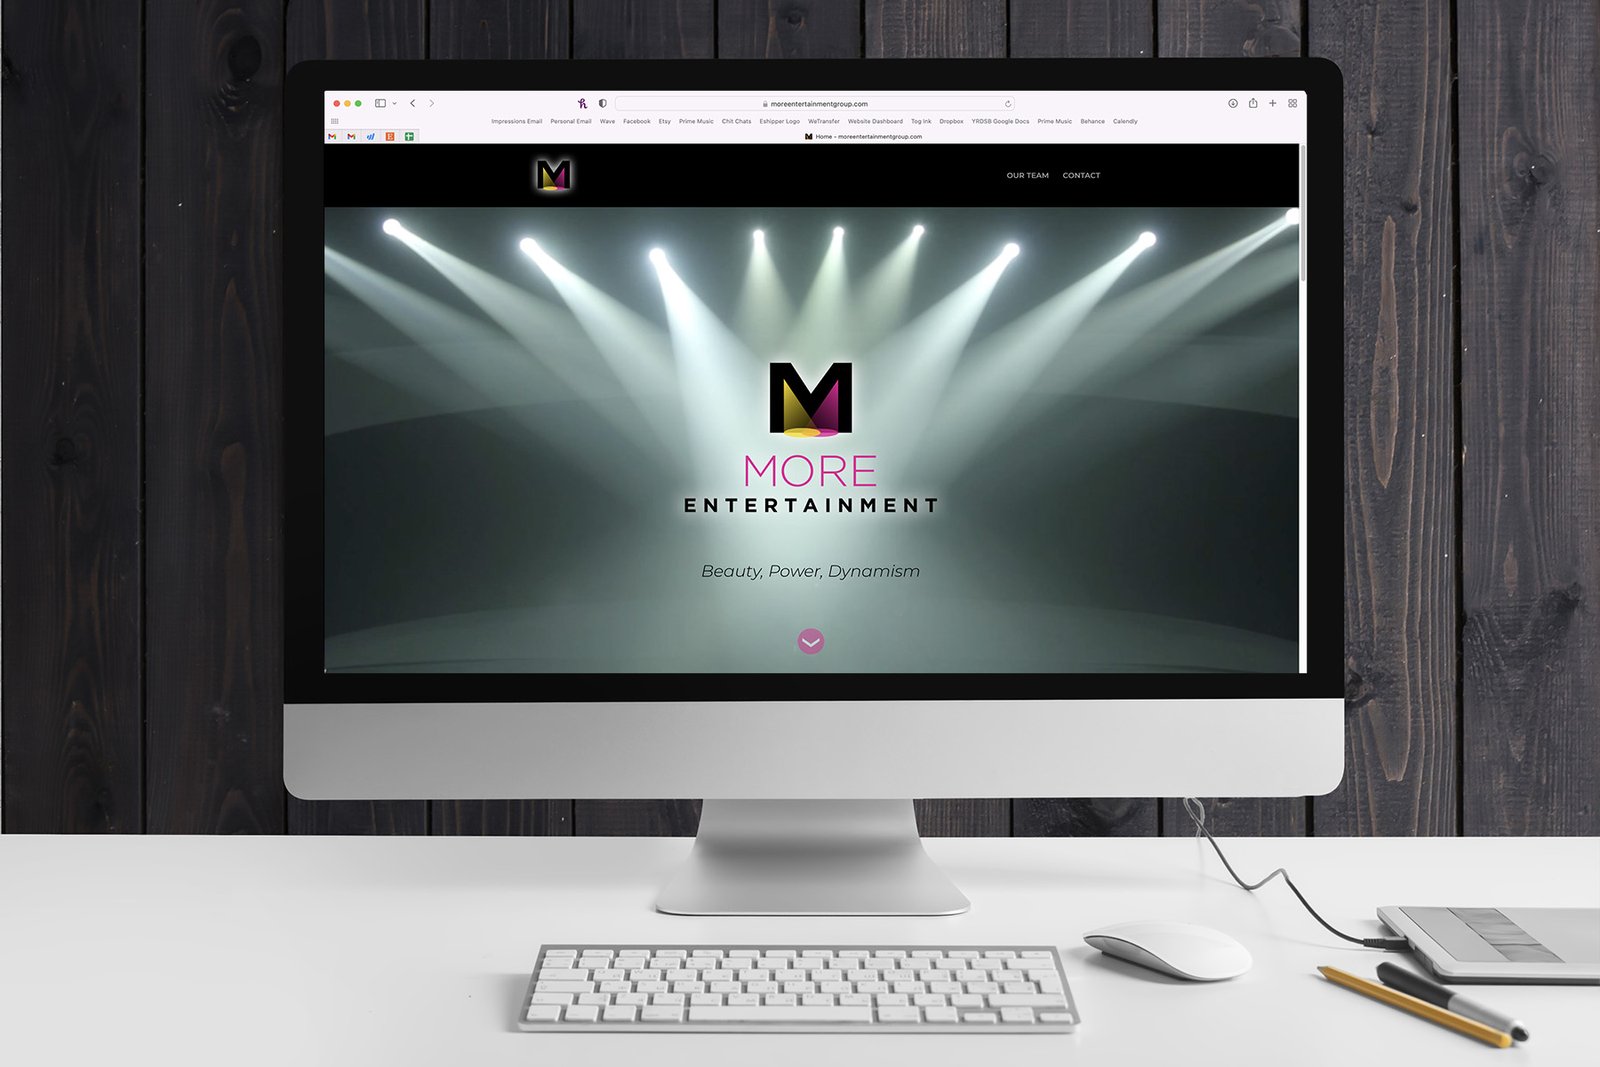 More Entertainment Website - Website Design Services for Small Businesses